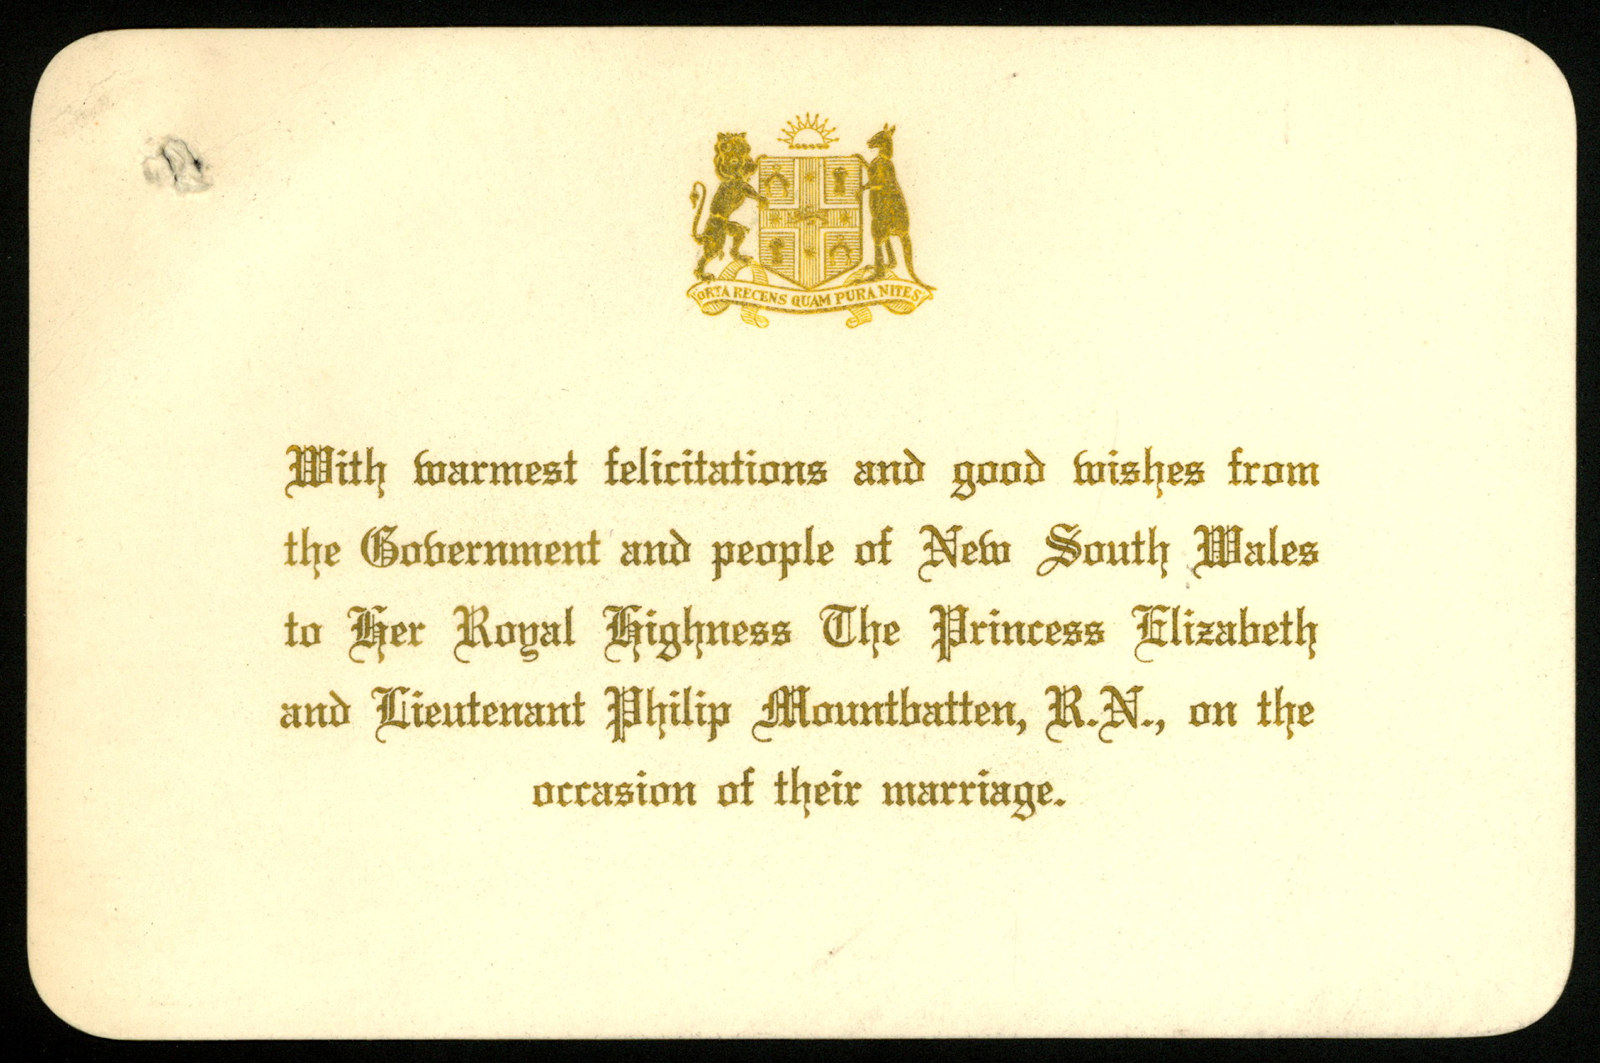 Felicitations and good wishes from the Government and people of NSW